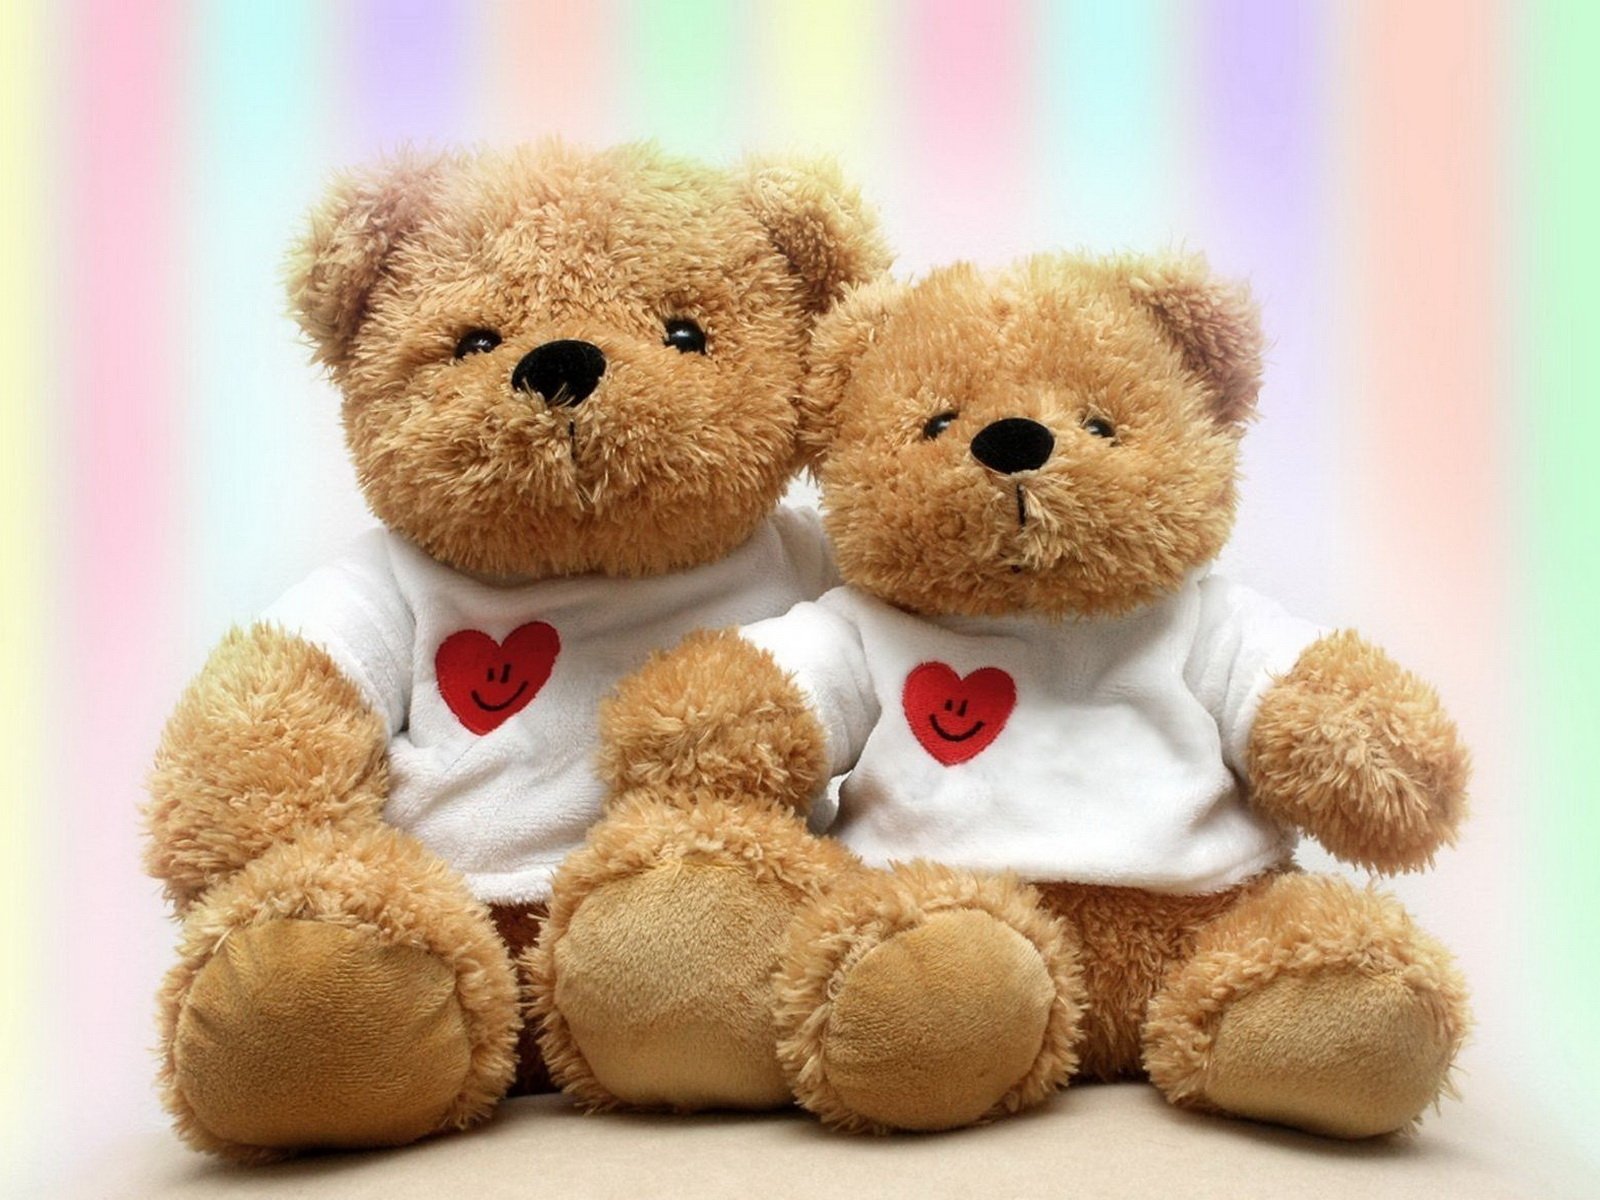 Teddy Bear Lonely Windows 8 Theme and Wallpapers | All for Windows ...